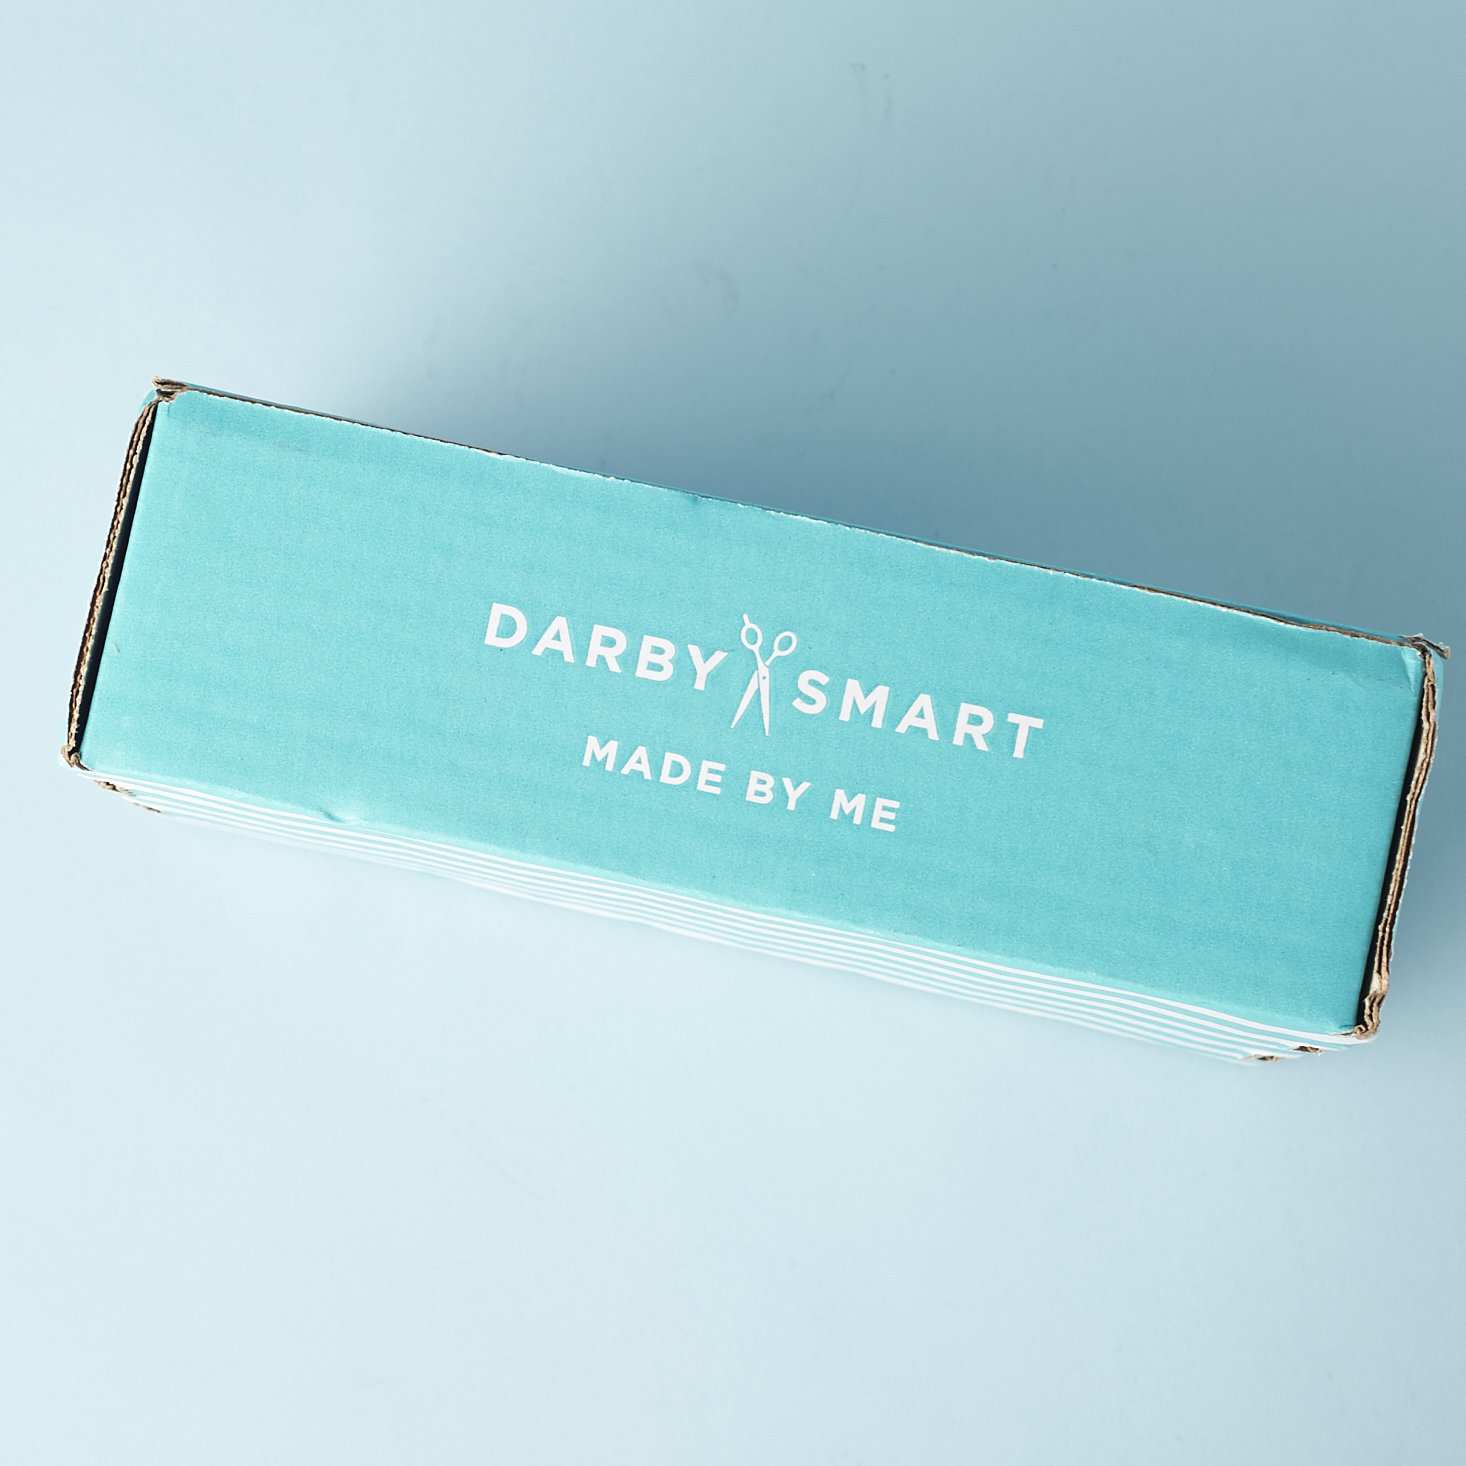 FYI – Darby Smart Subscriptions Are Ending